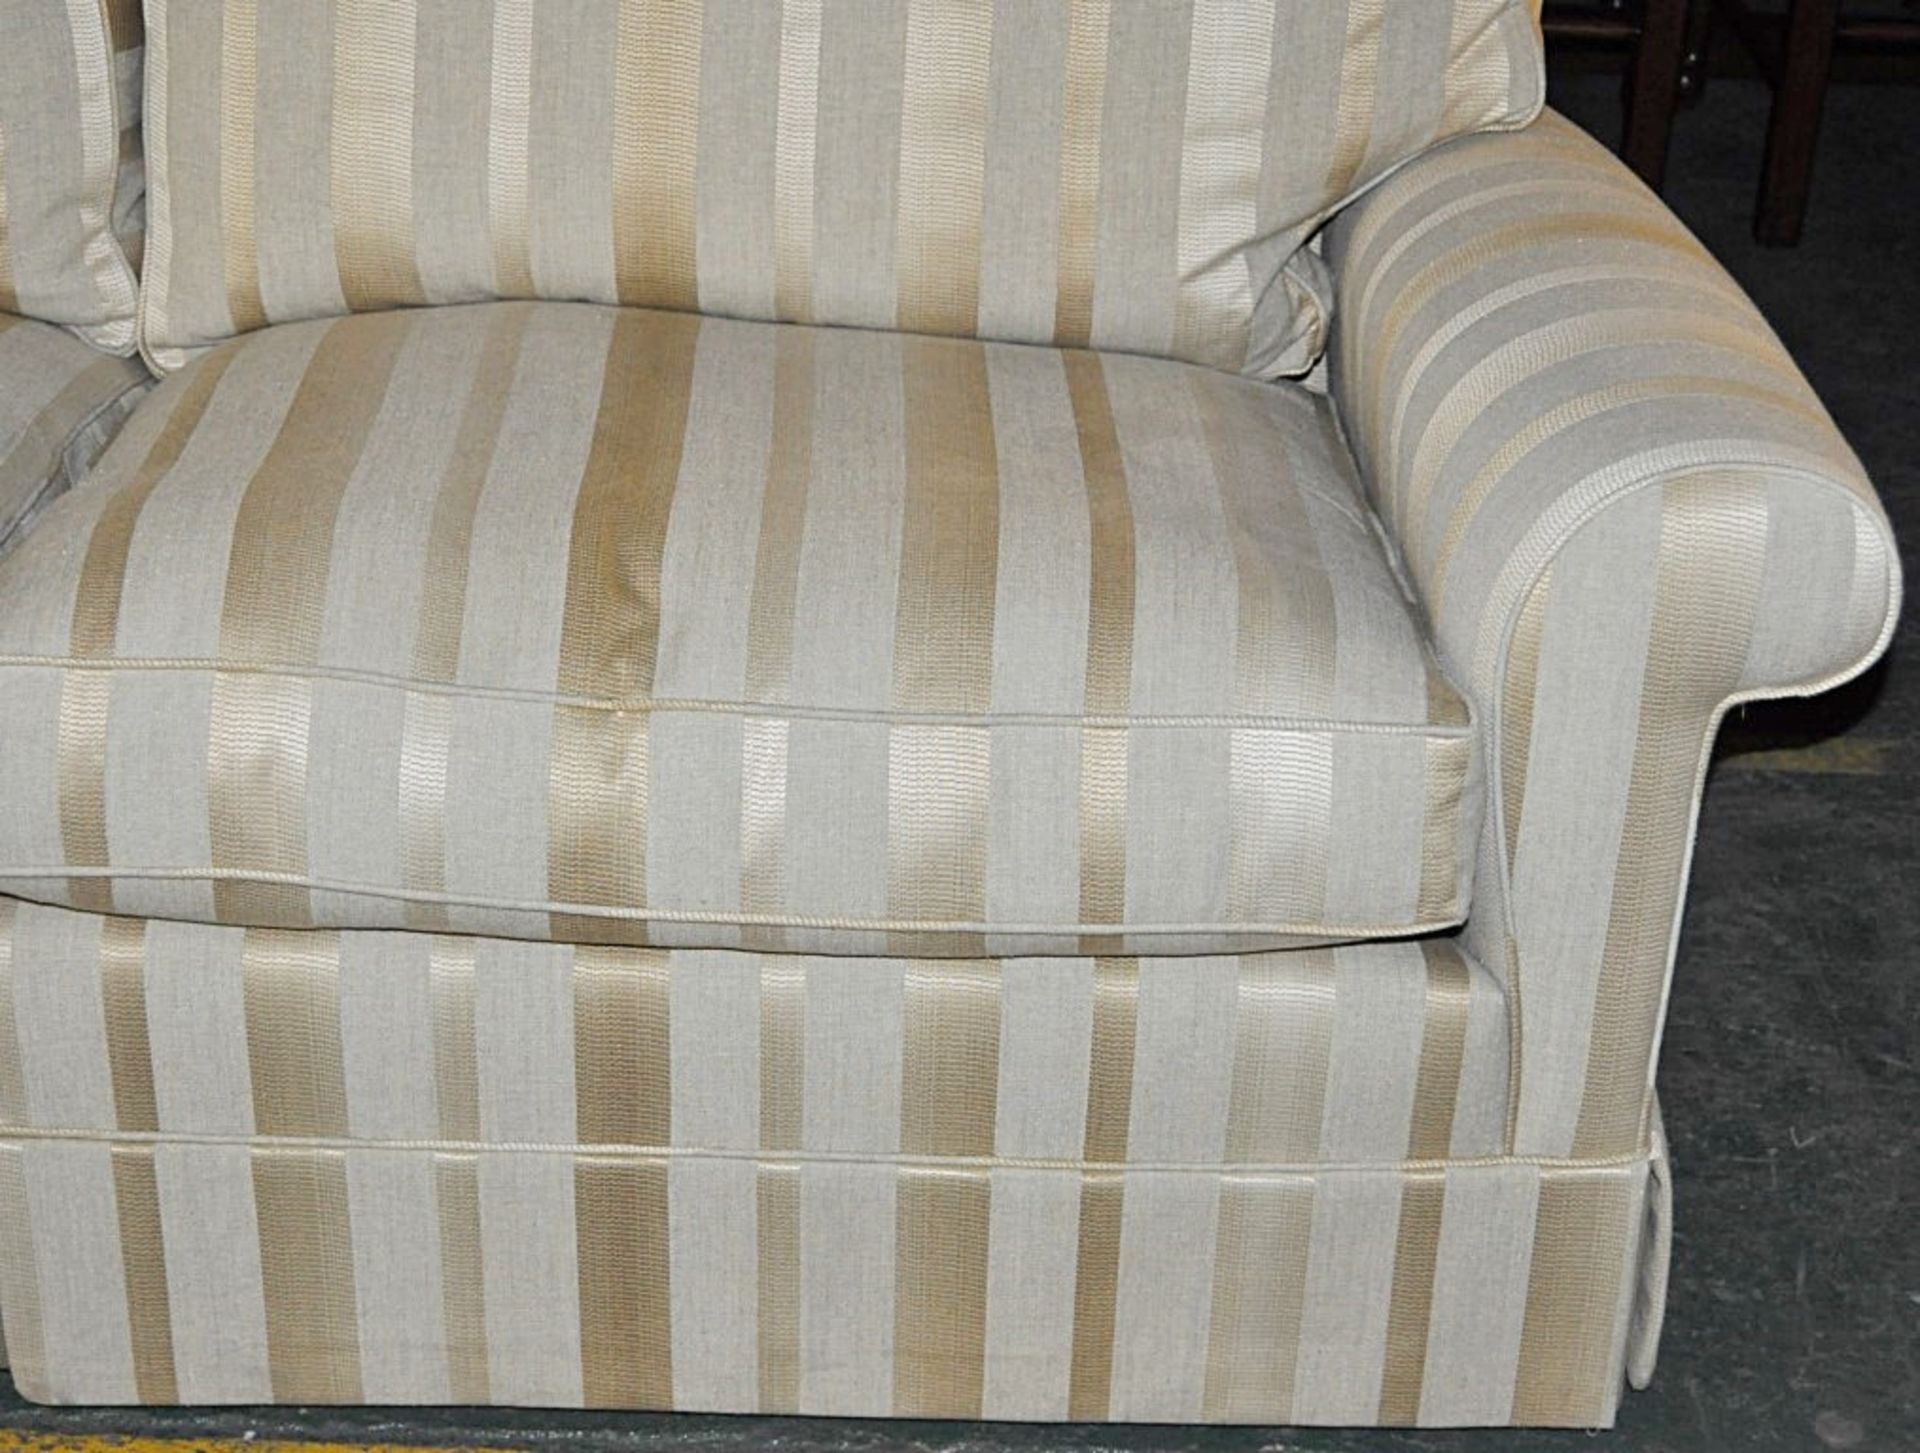 1 x 3 Seater & 2 Seater Luxury Sofa Set by Duresta – Comes in a Lewis Stripe – Fantastic Quality - Image 2 of 3